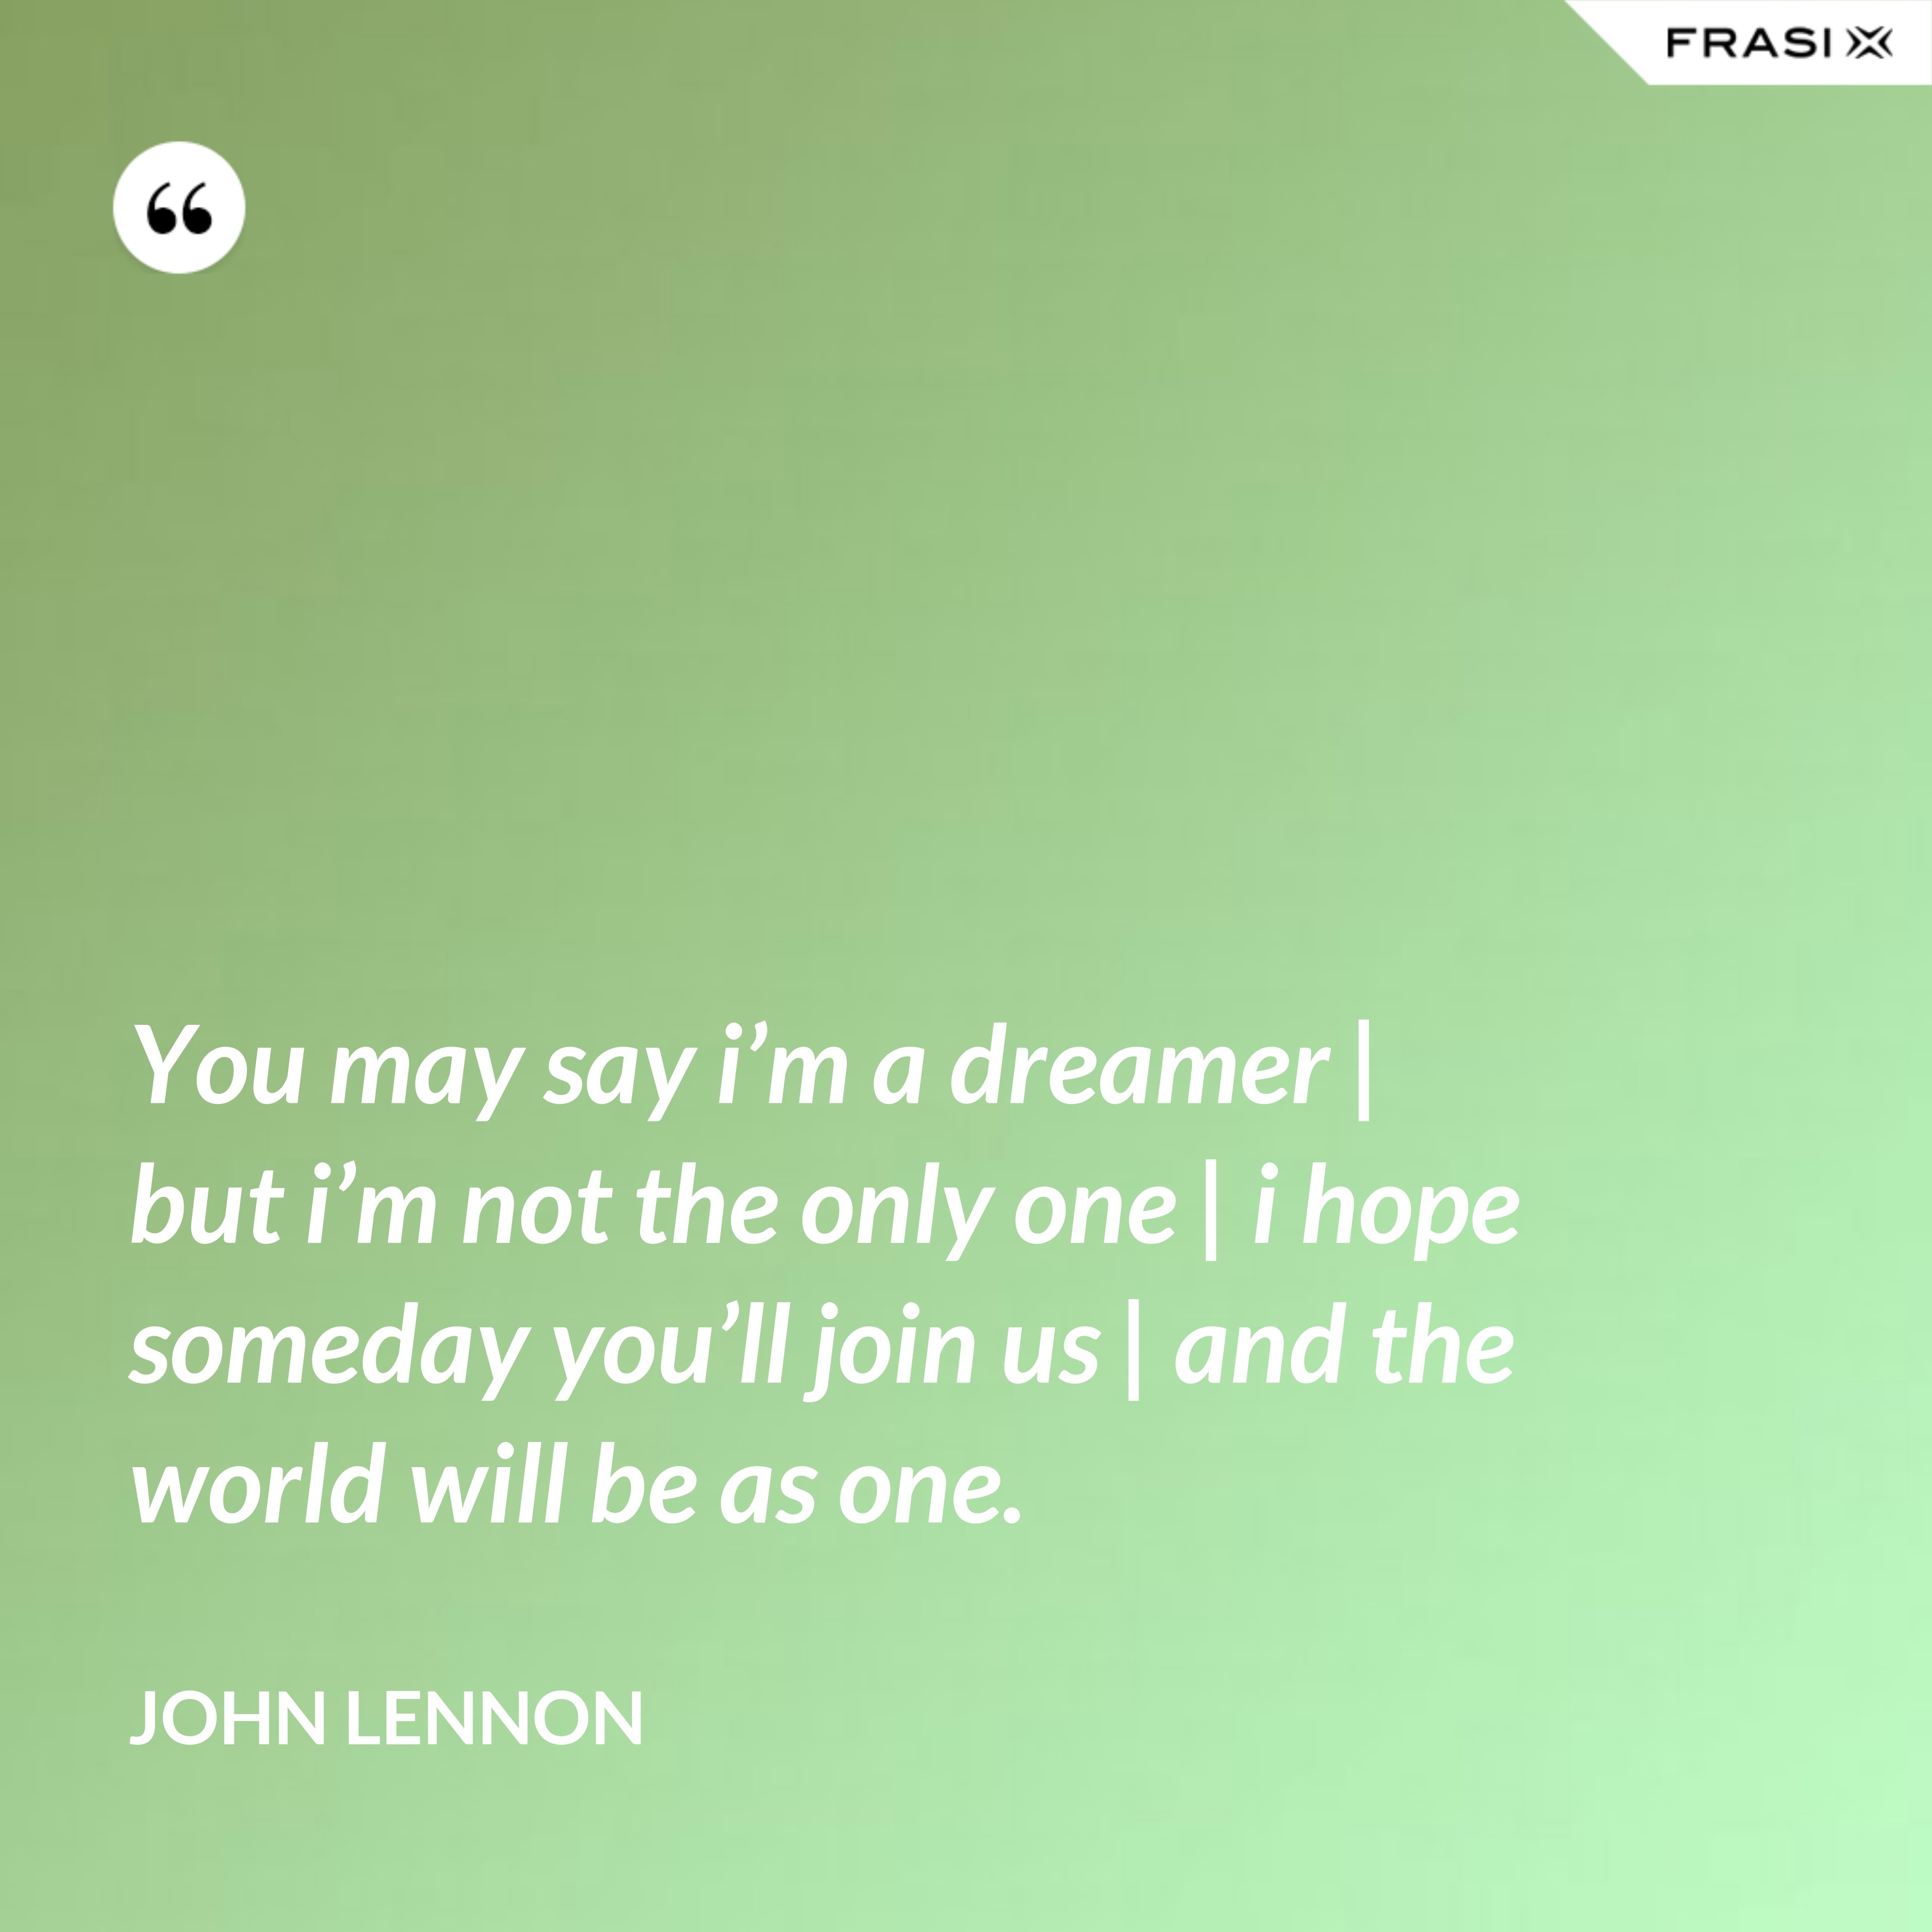 You may say i’m a dreamer | but i’m not the only one | i hope someday you’ll join us | and the world will be as one. - John Lennon